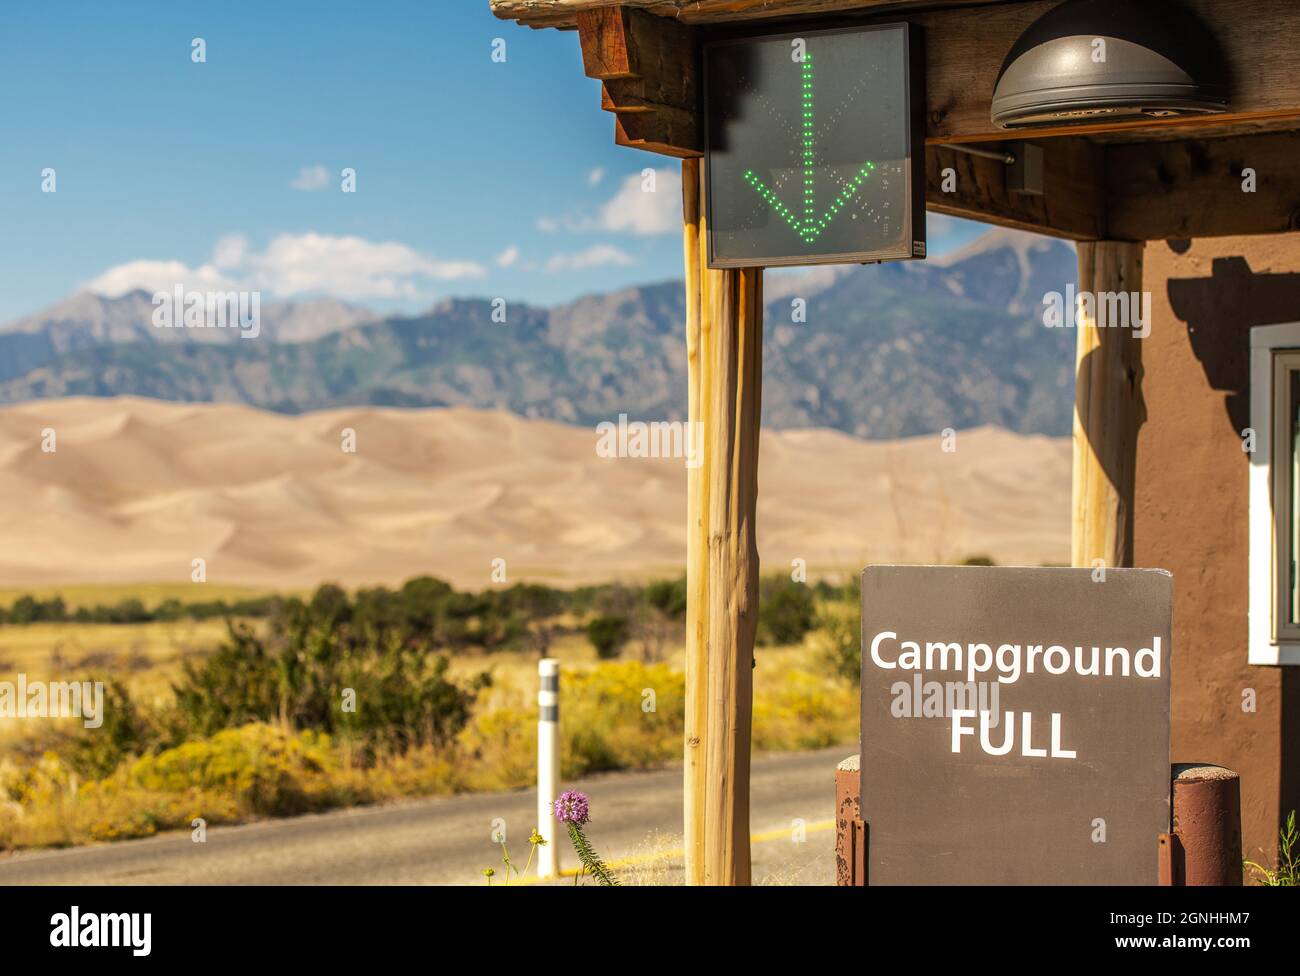 Campground Full Park Entrance Sign. Great Sand Dunes National Park and Preserve in Colorado, USA. Camping Theme. Stock Photo